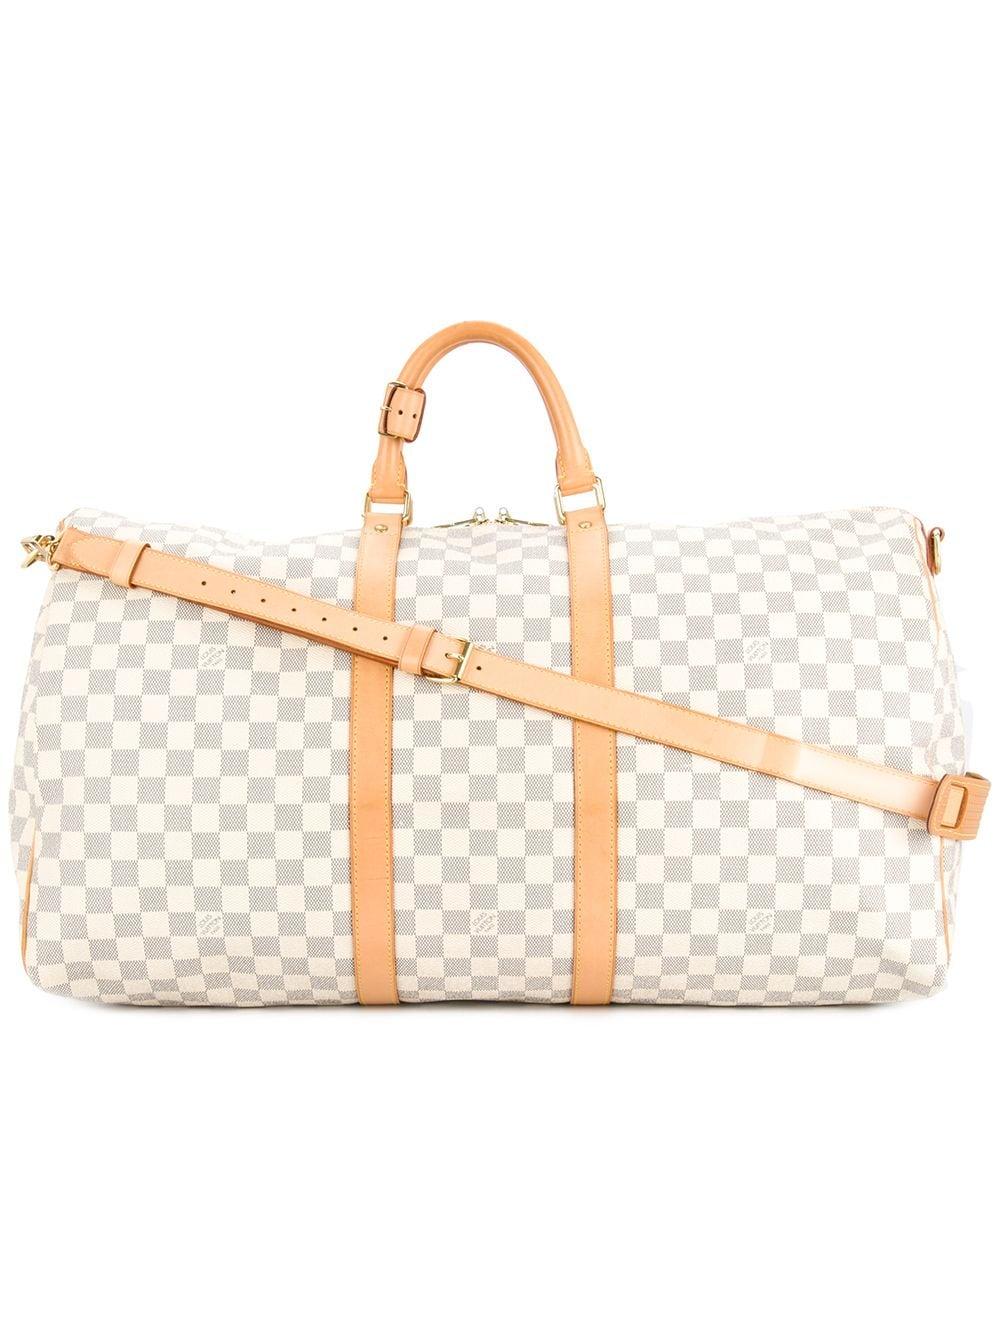 used louis vuitton duffle bags